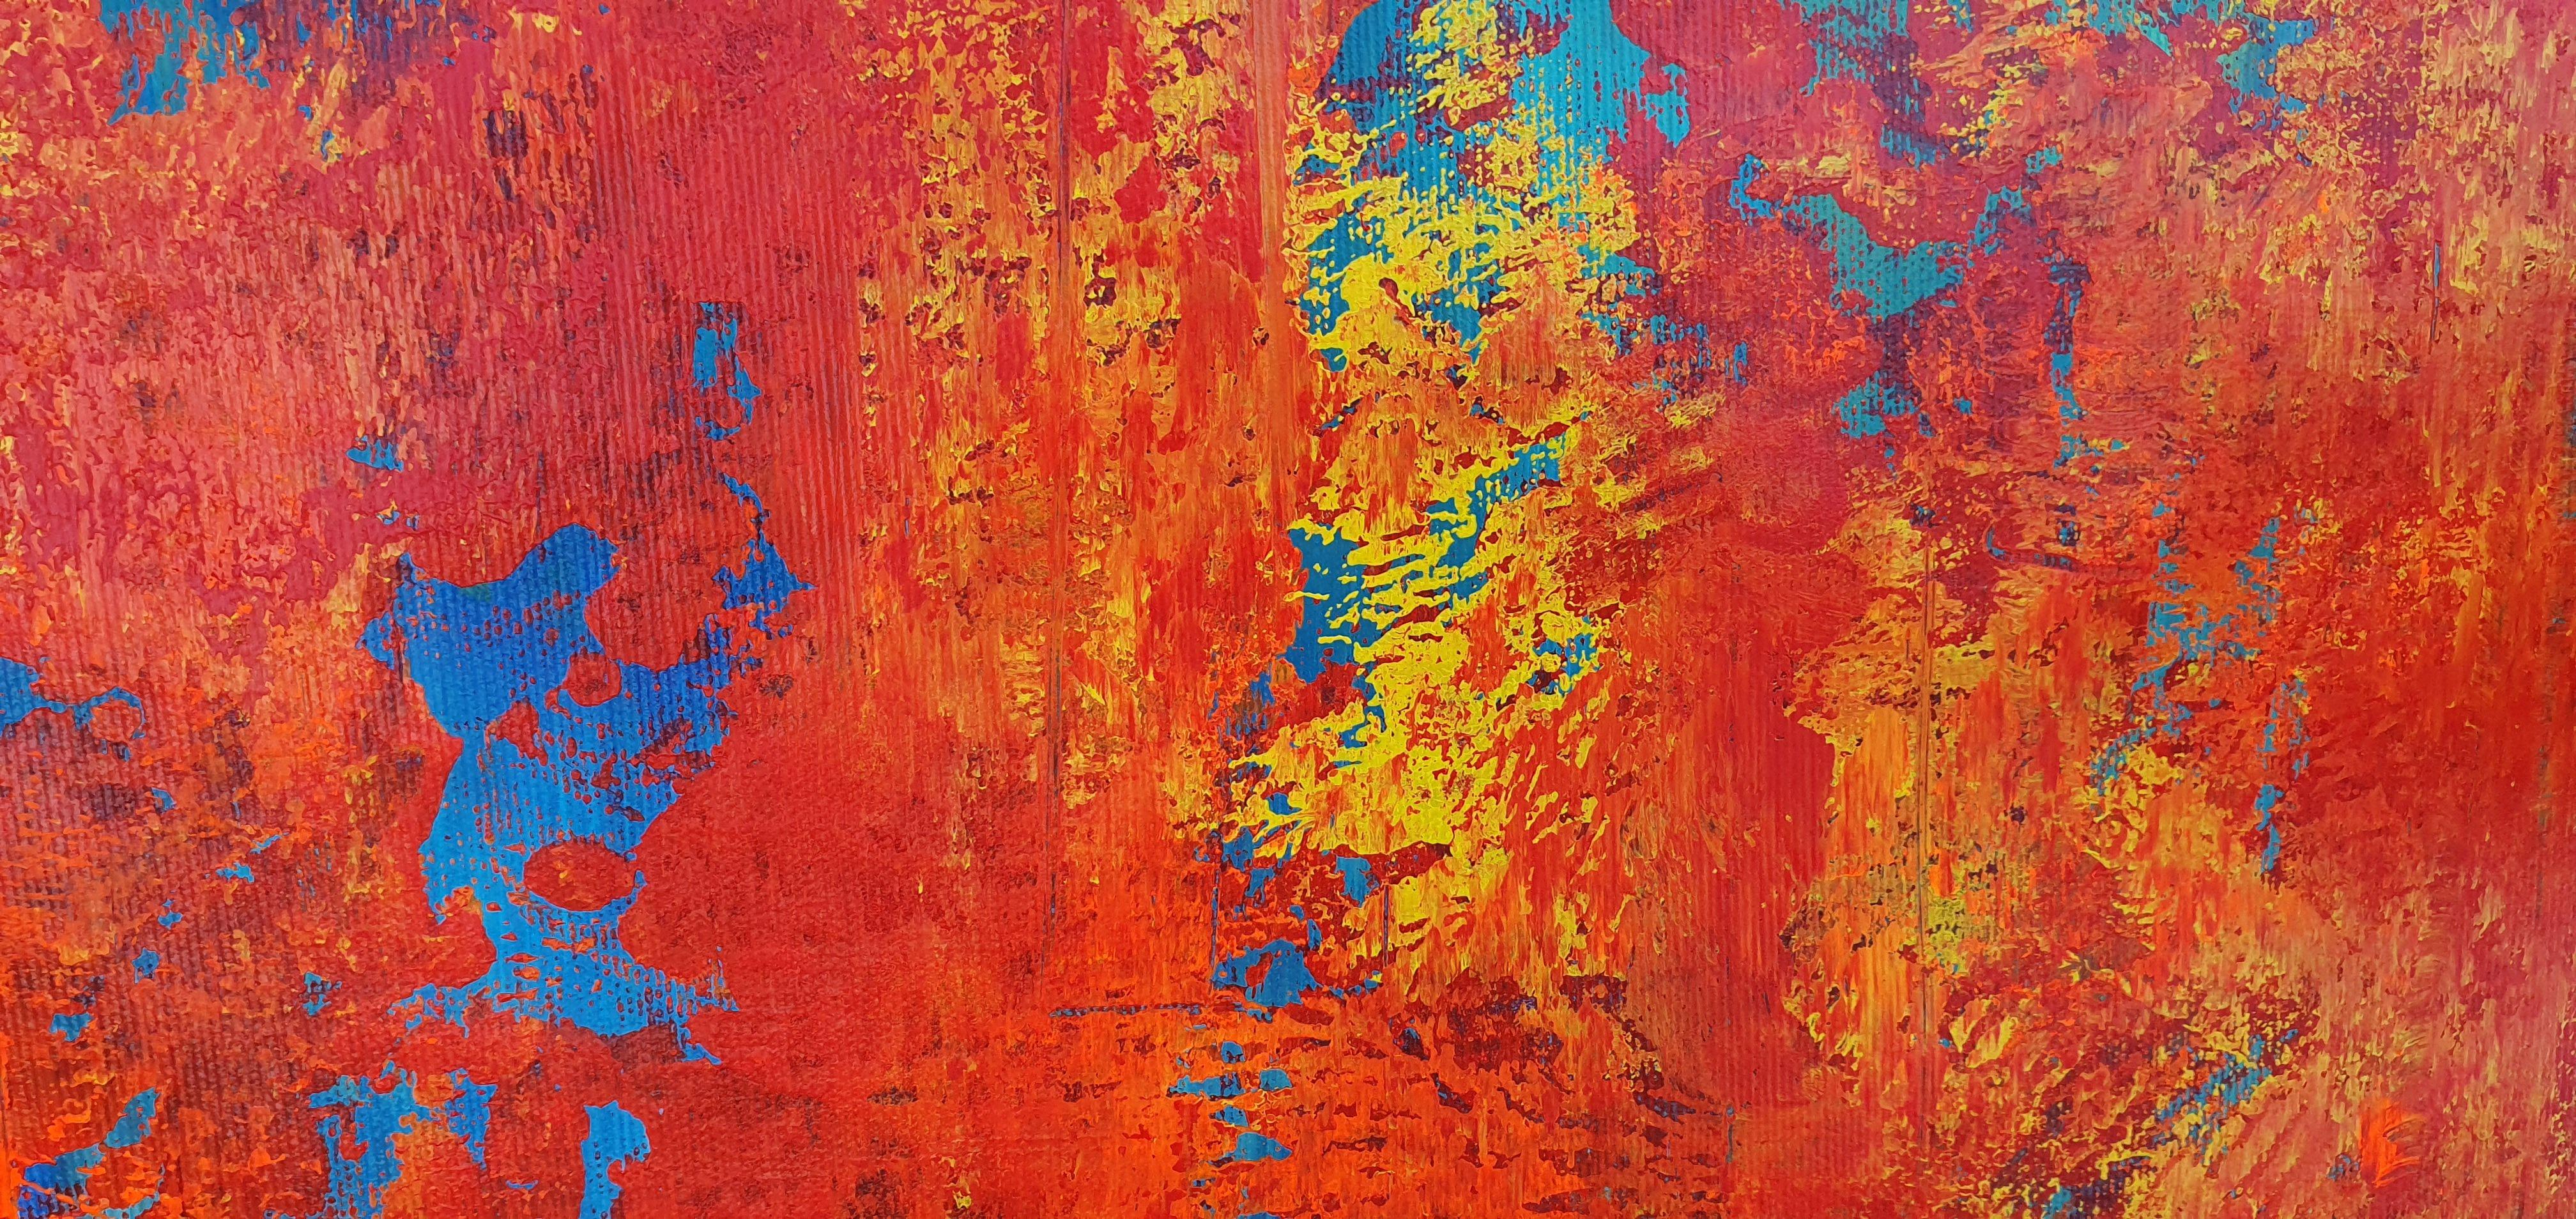 An original one-of-a-kind expressionistic abstract painting.  Emotional and spontaneous, joyful artwork breathing with positivity, warmth, energy, and passion.    Layers upon layers of professional rich pigment acrylics on triple primed canvas